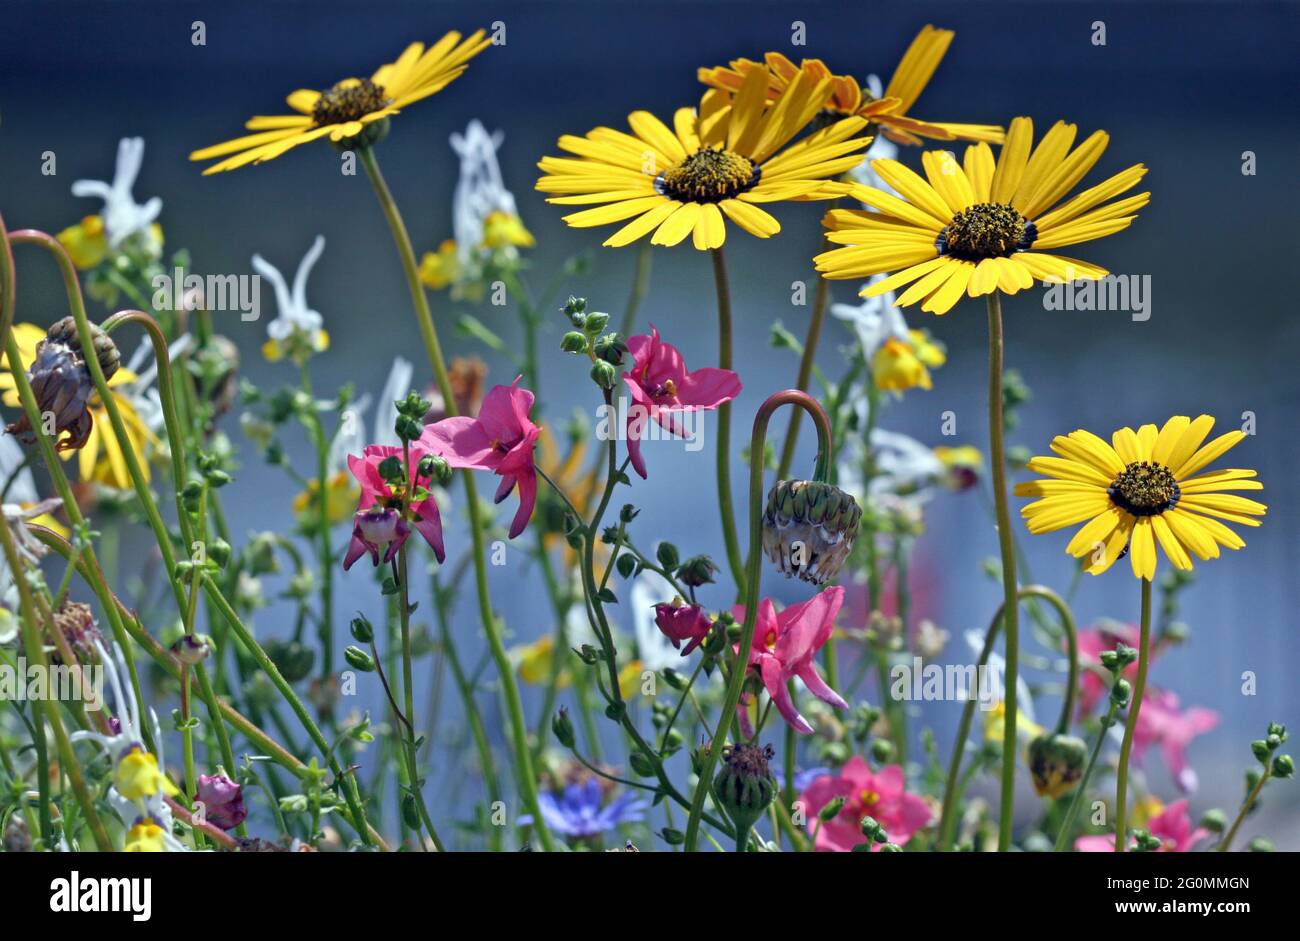 A tangled jumble of sunlit flowers featuring African Daisy-type golden yellow flowers (Arctotis) with a dark centre and tiny pink aquiegia type flower Stock Photo